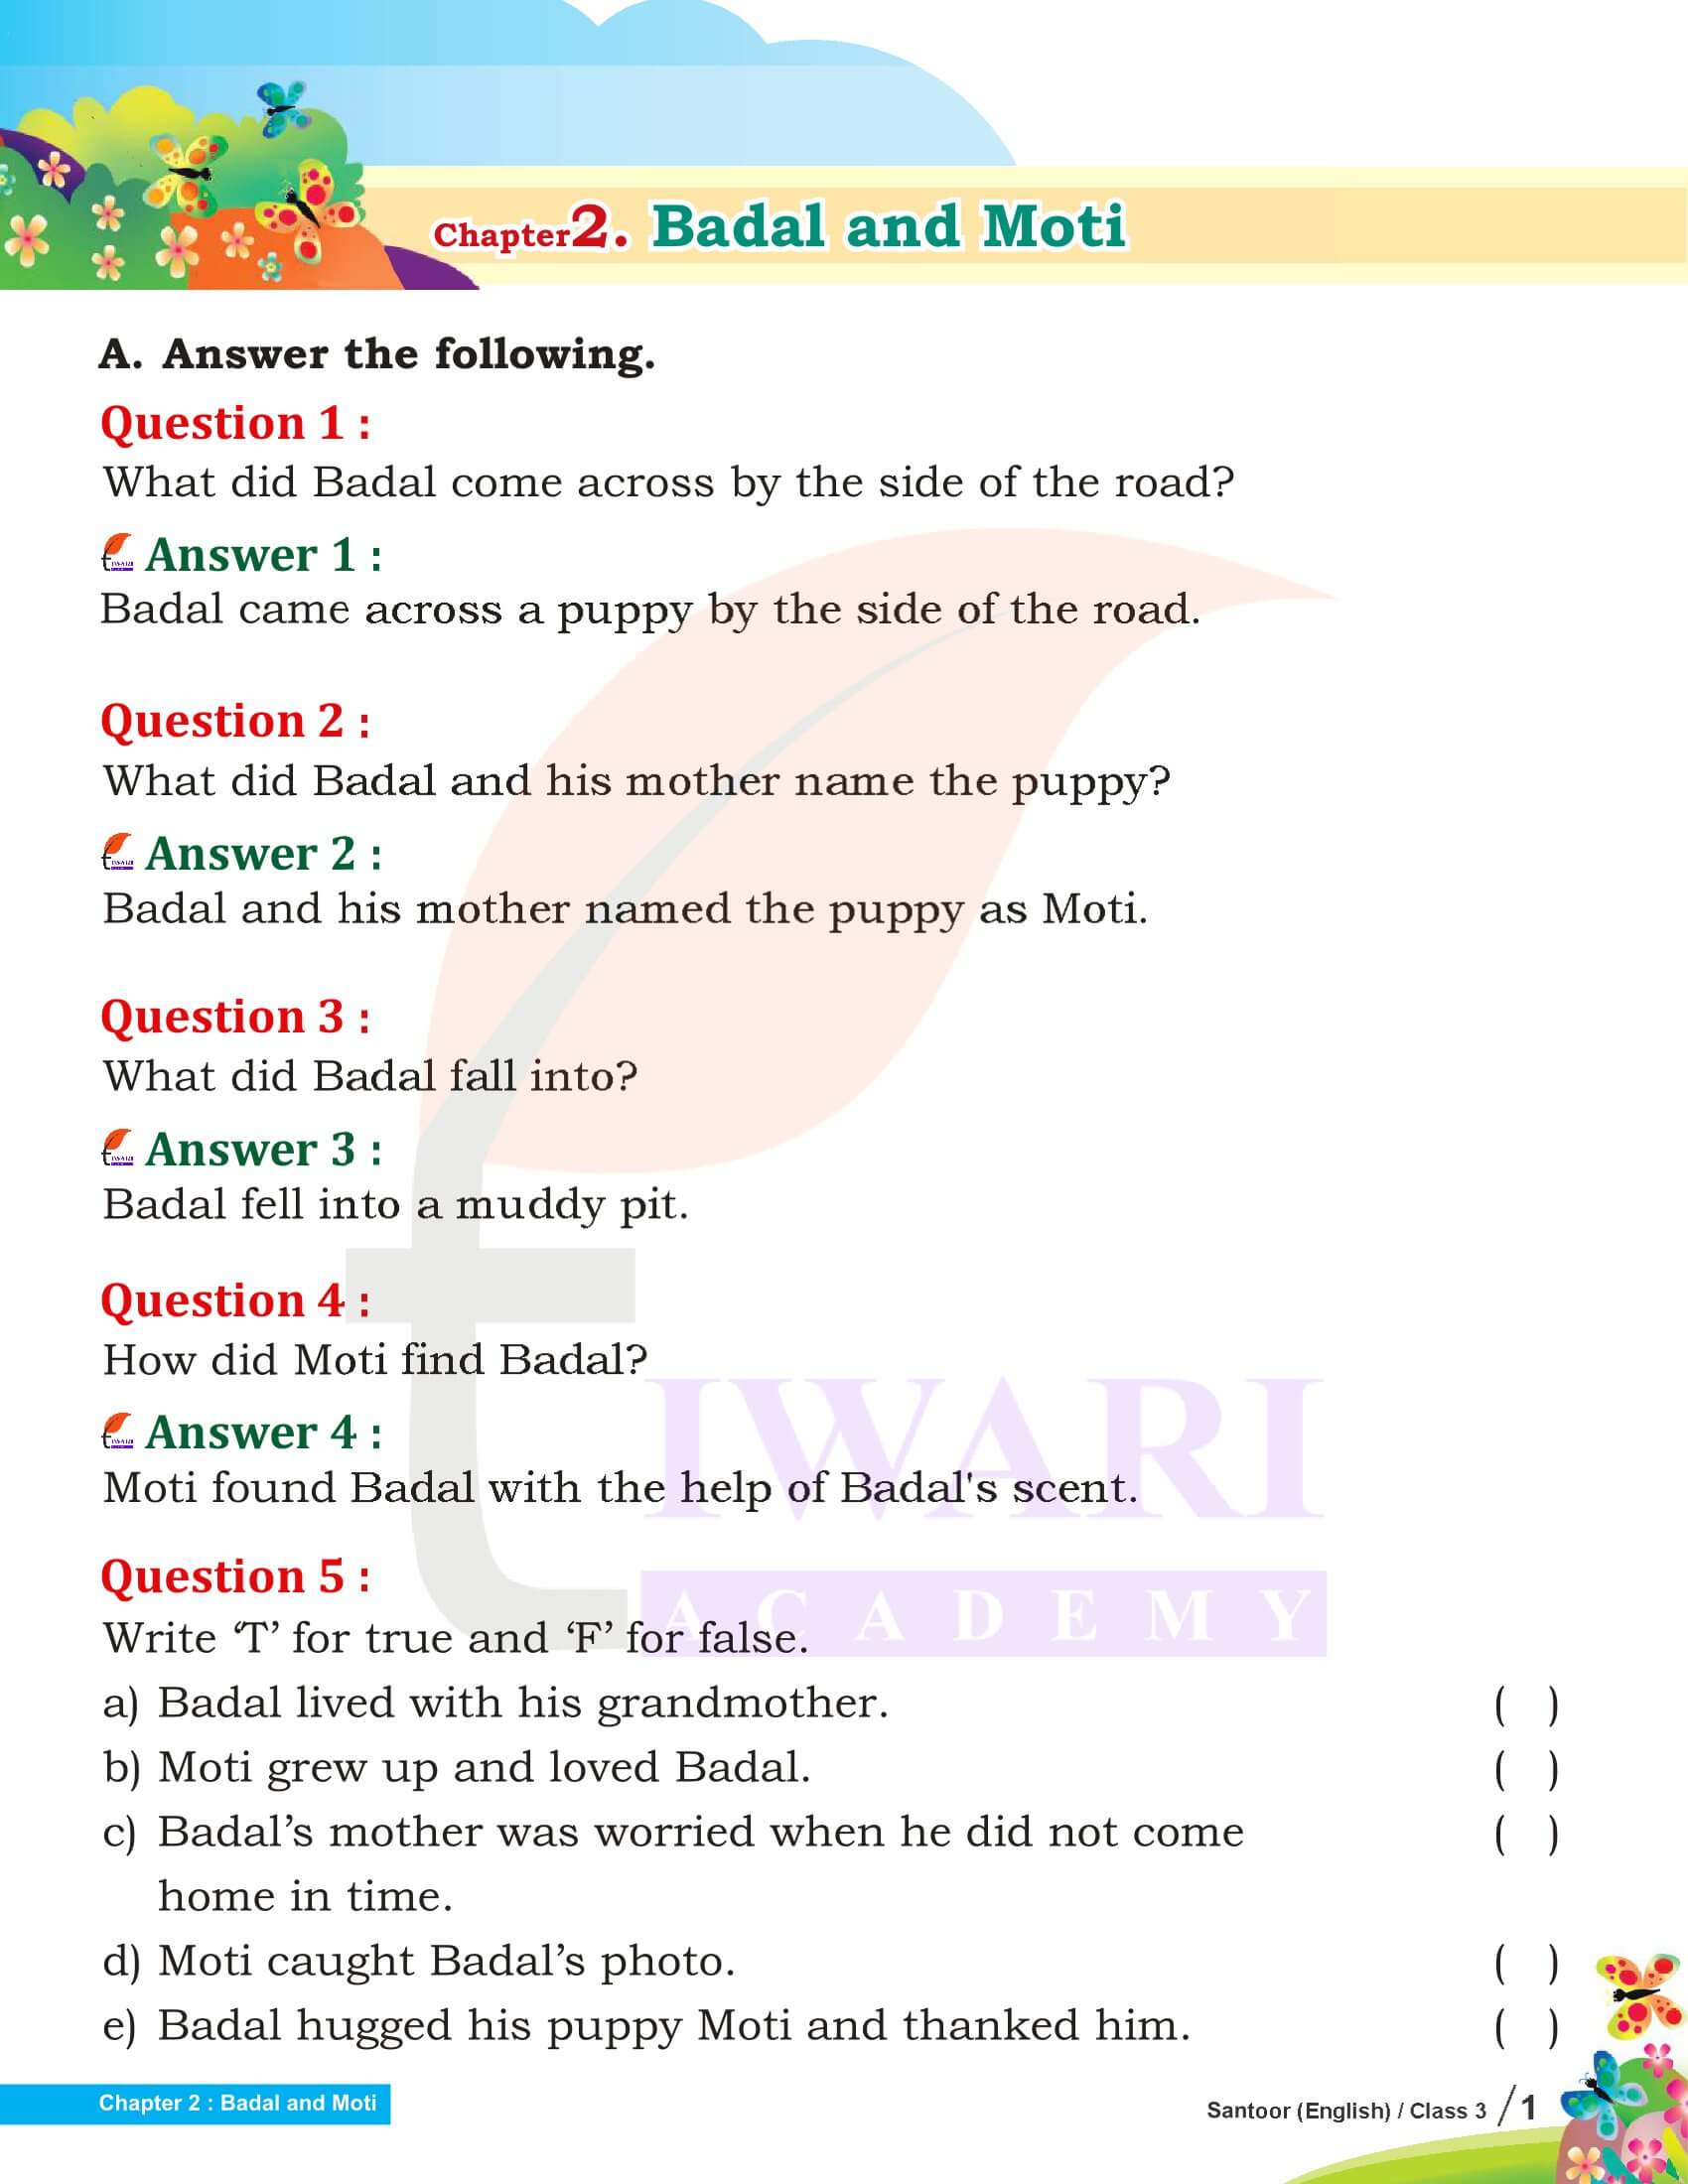 Class 3 English Santoor Chapter 2 Badal and Moti Answers